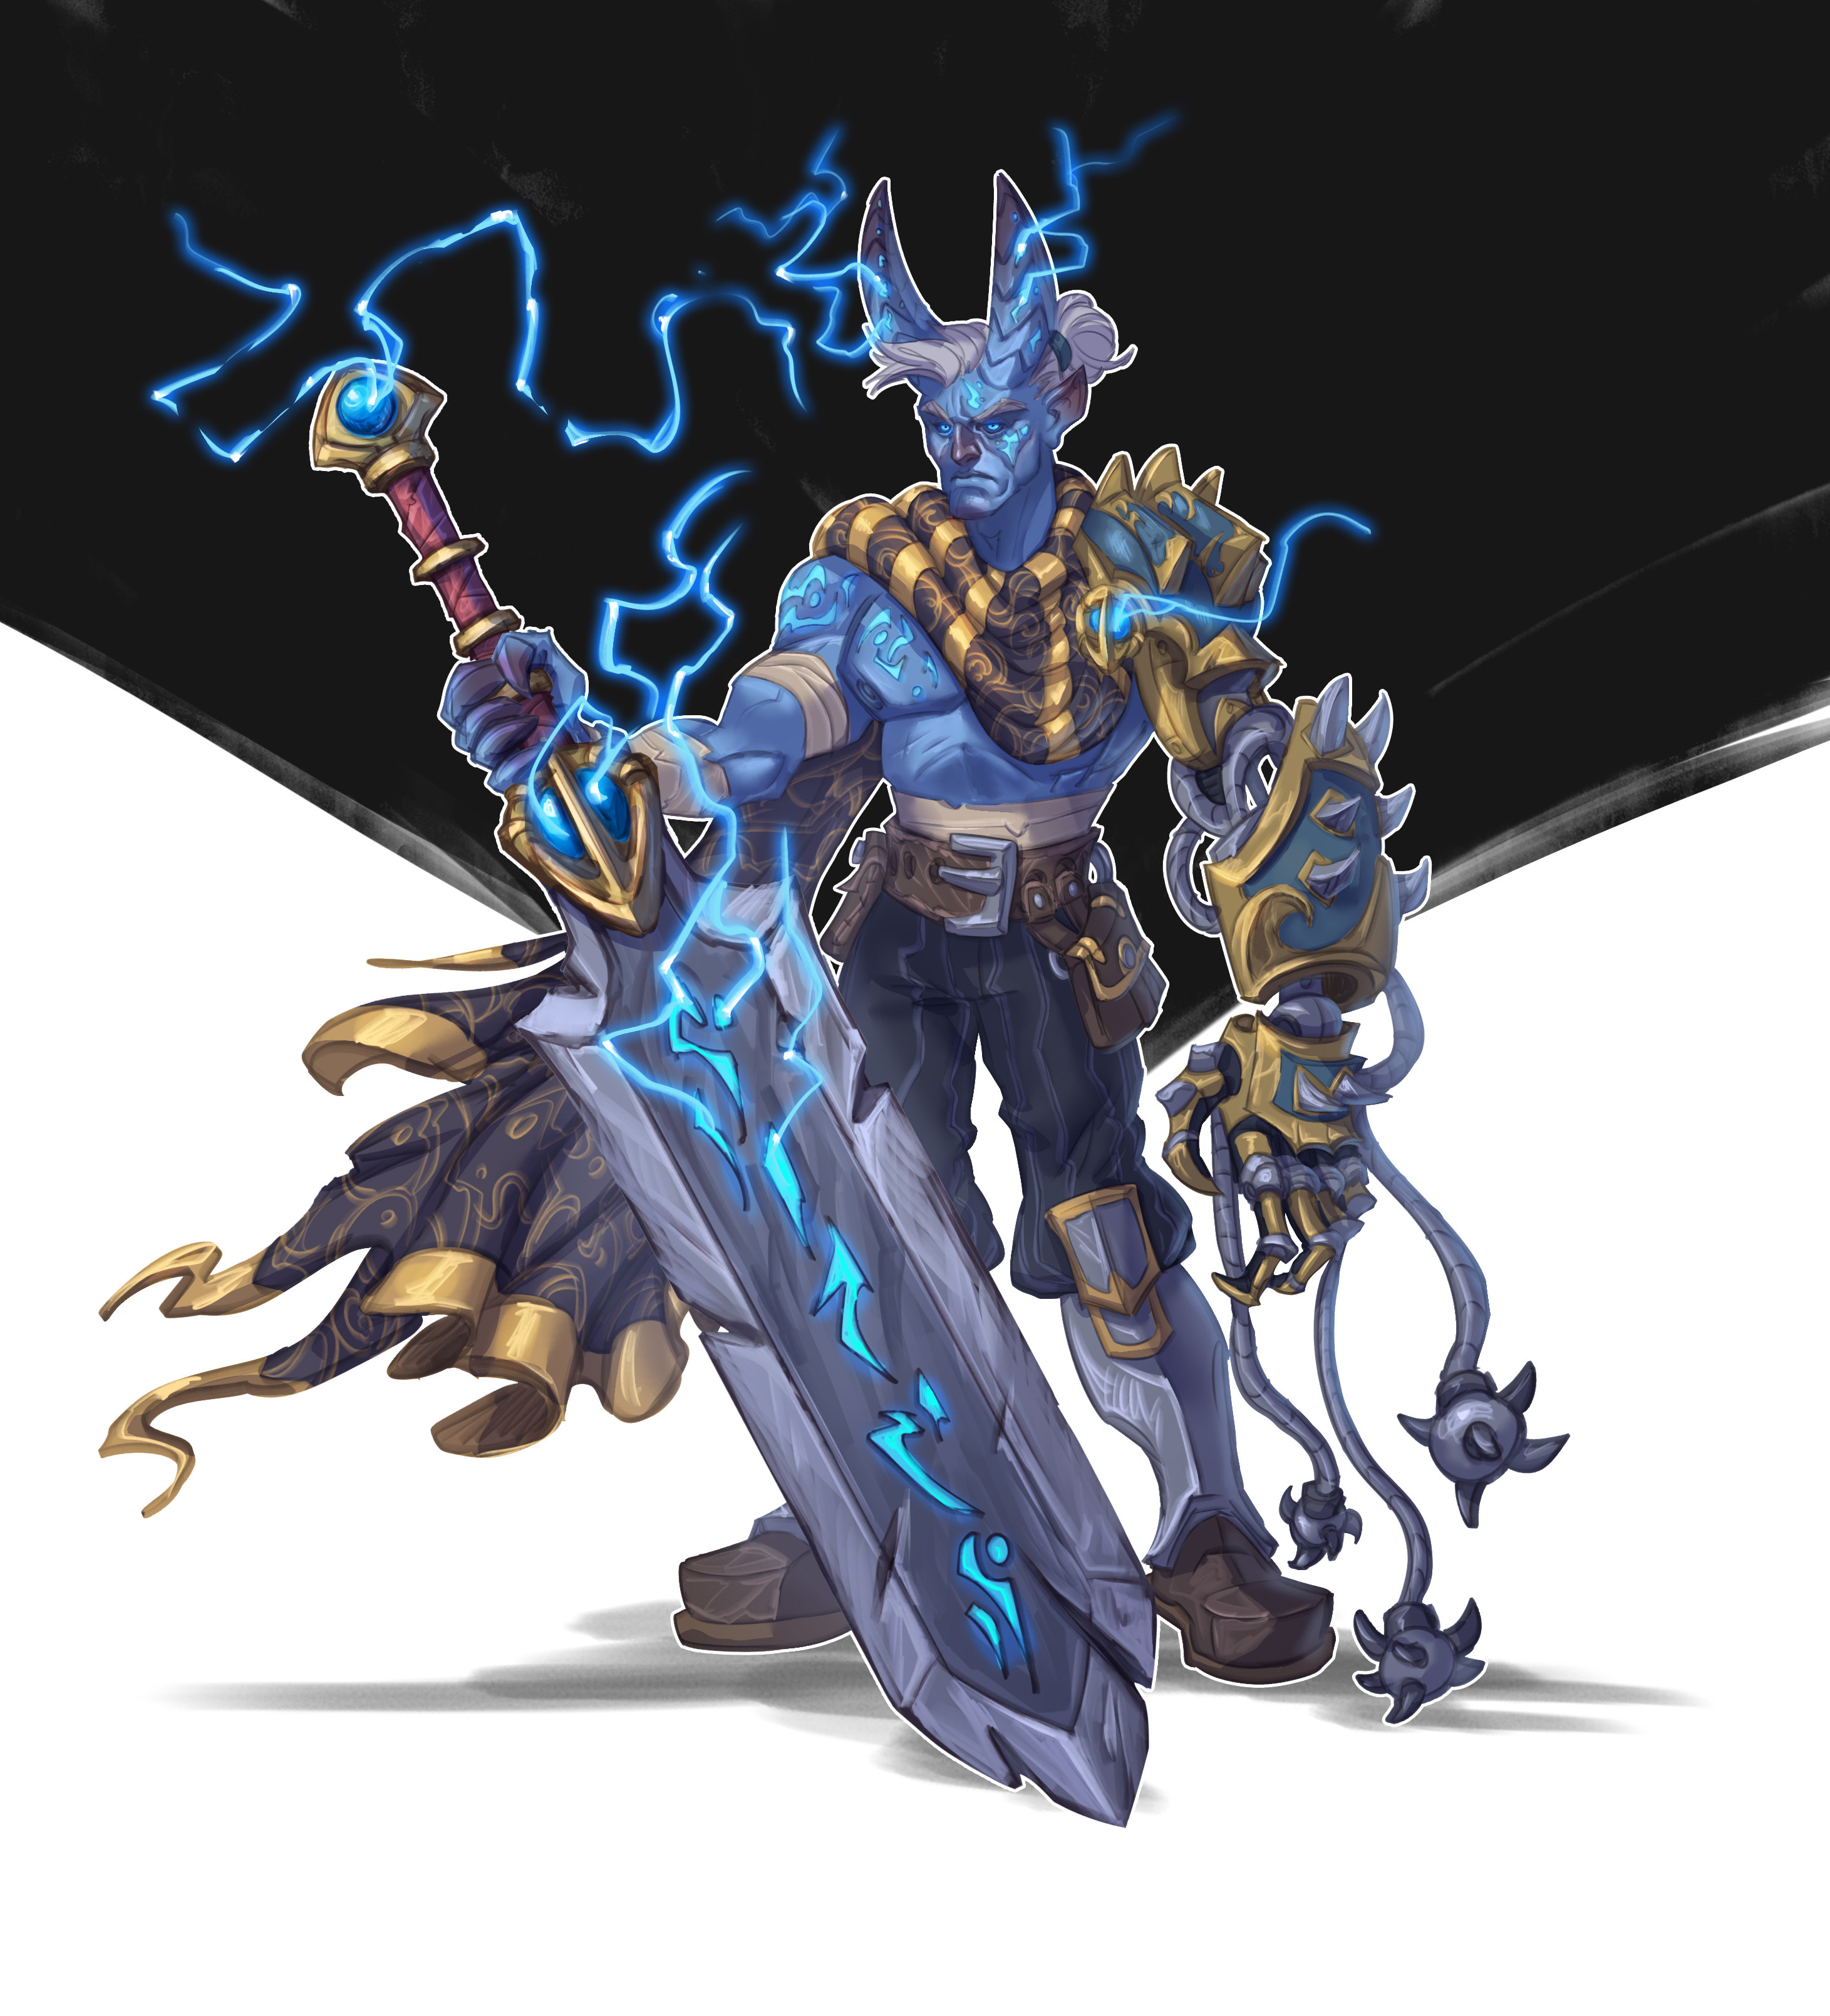 Soulfinder Artael, he will lead the way and crush the enemies with his Thunder Soul Sword